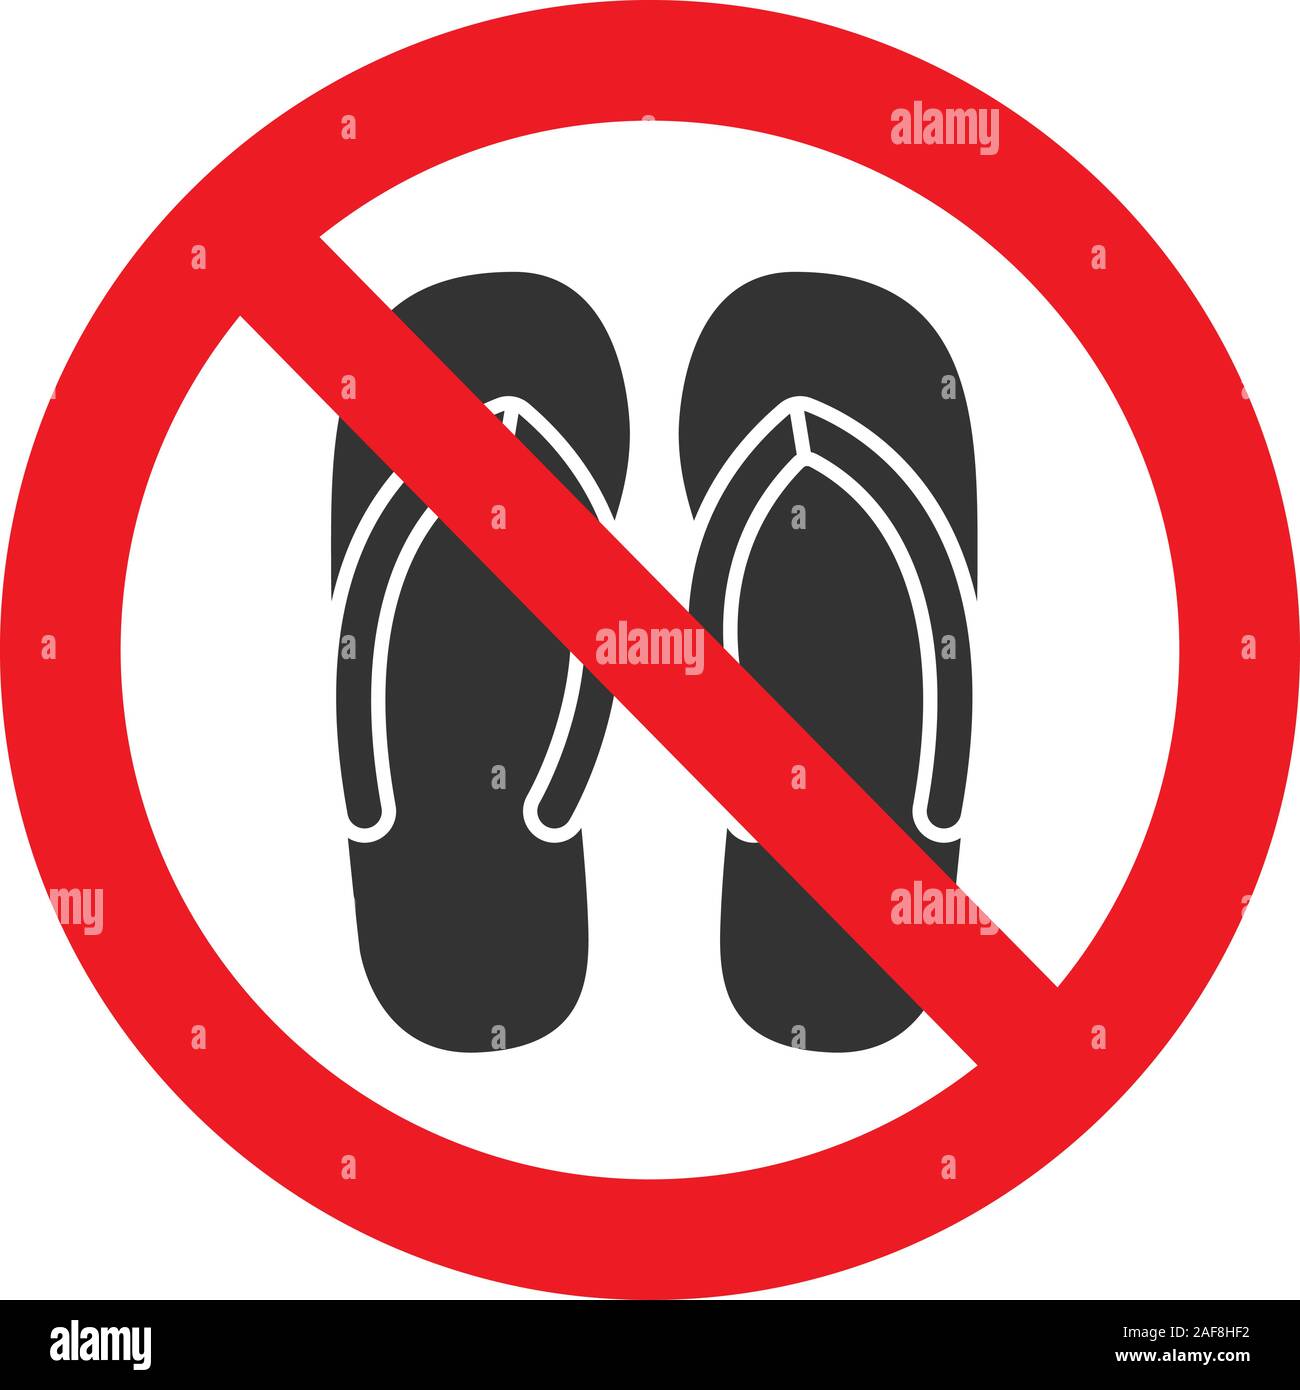 Forbidden sign with slippers glyph icon. No sandals, thongs or open ...